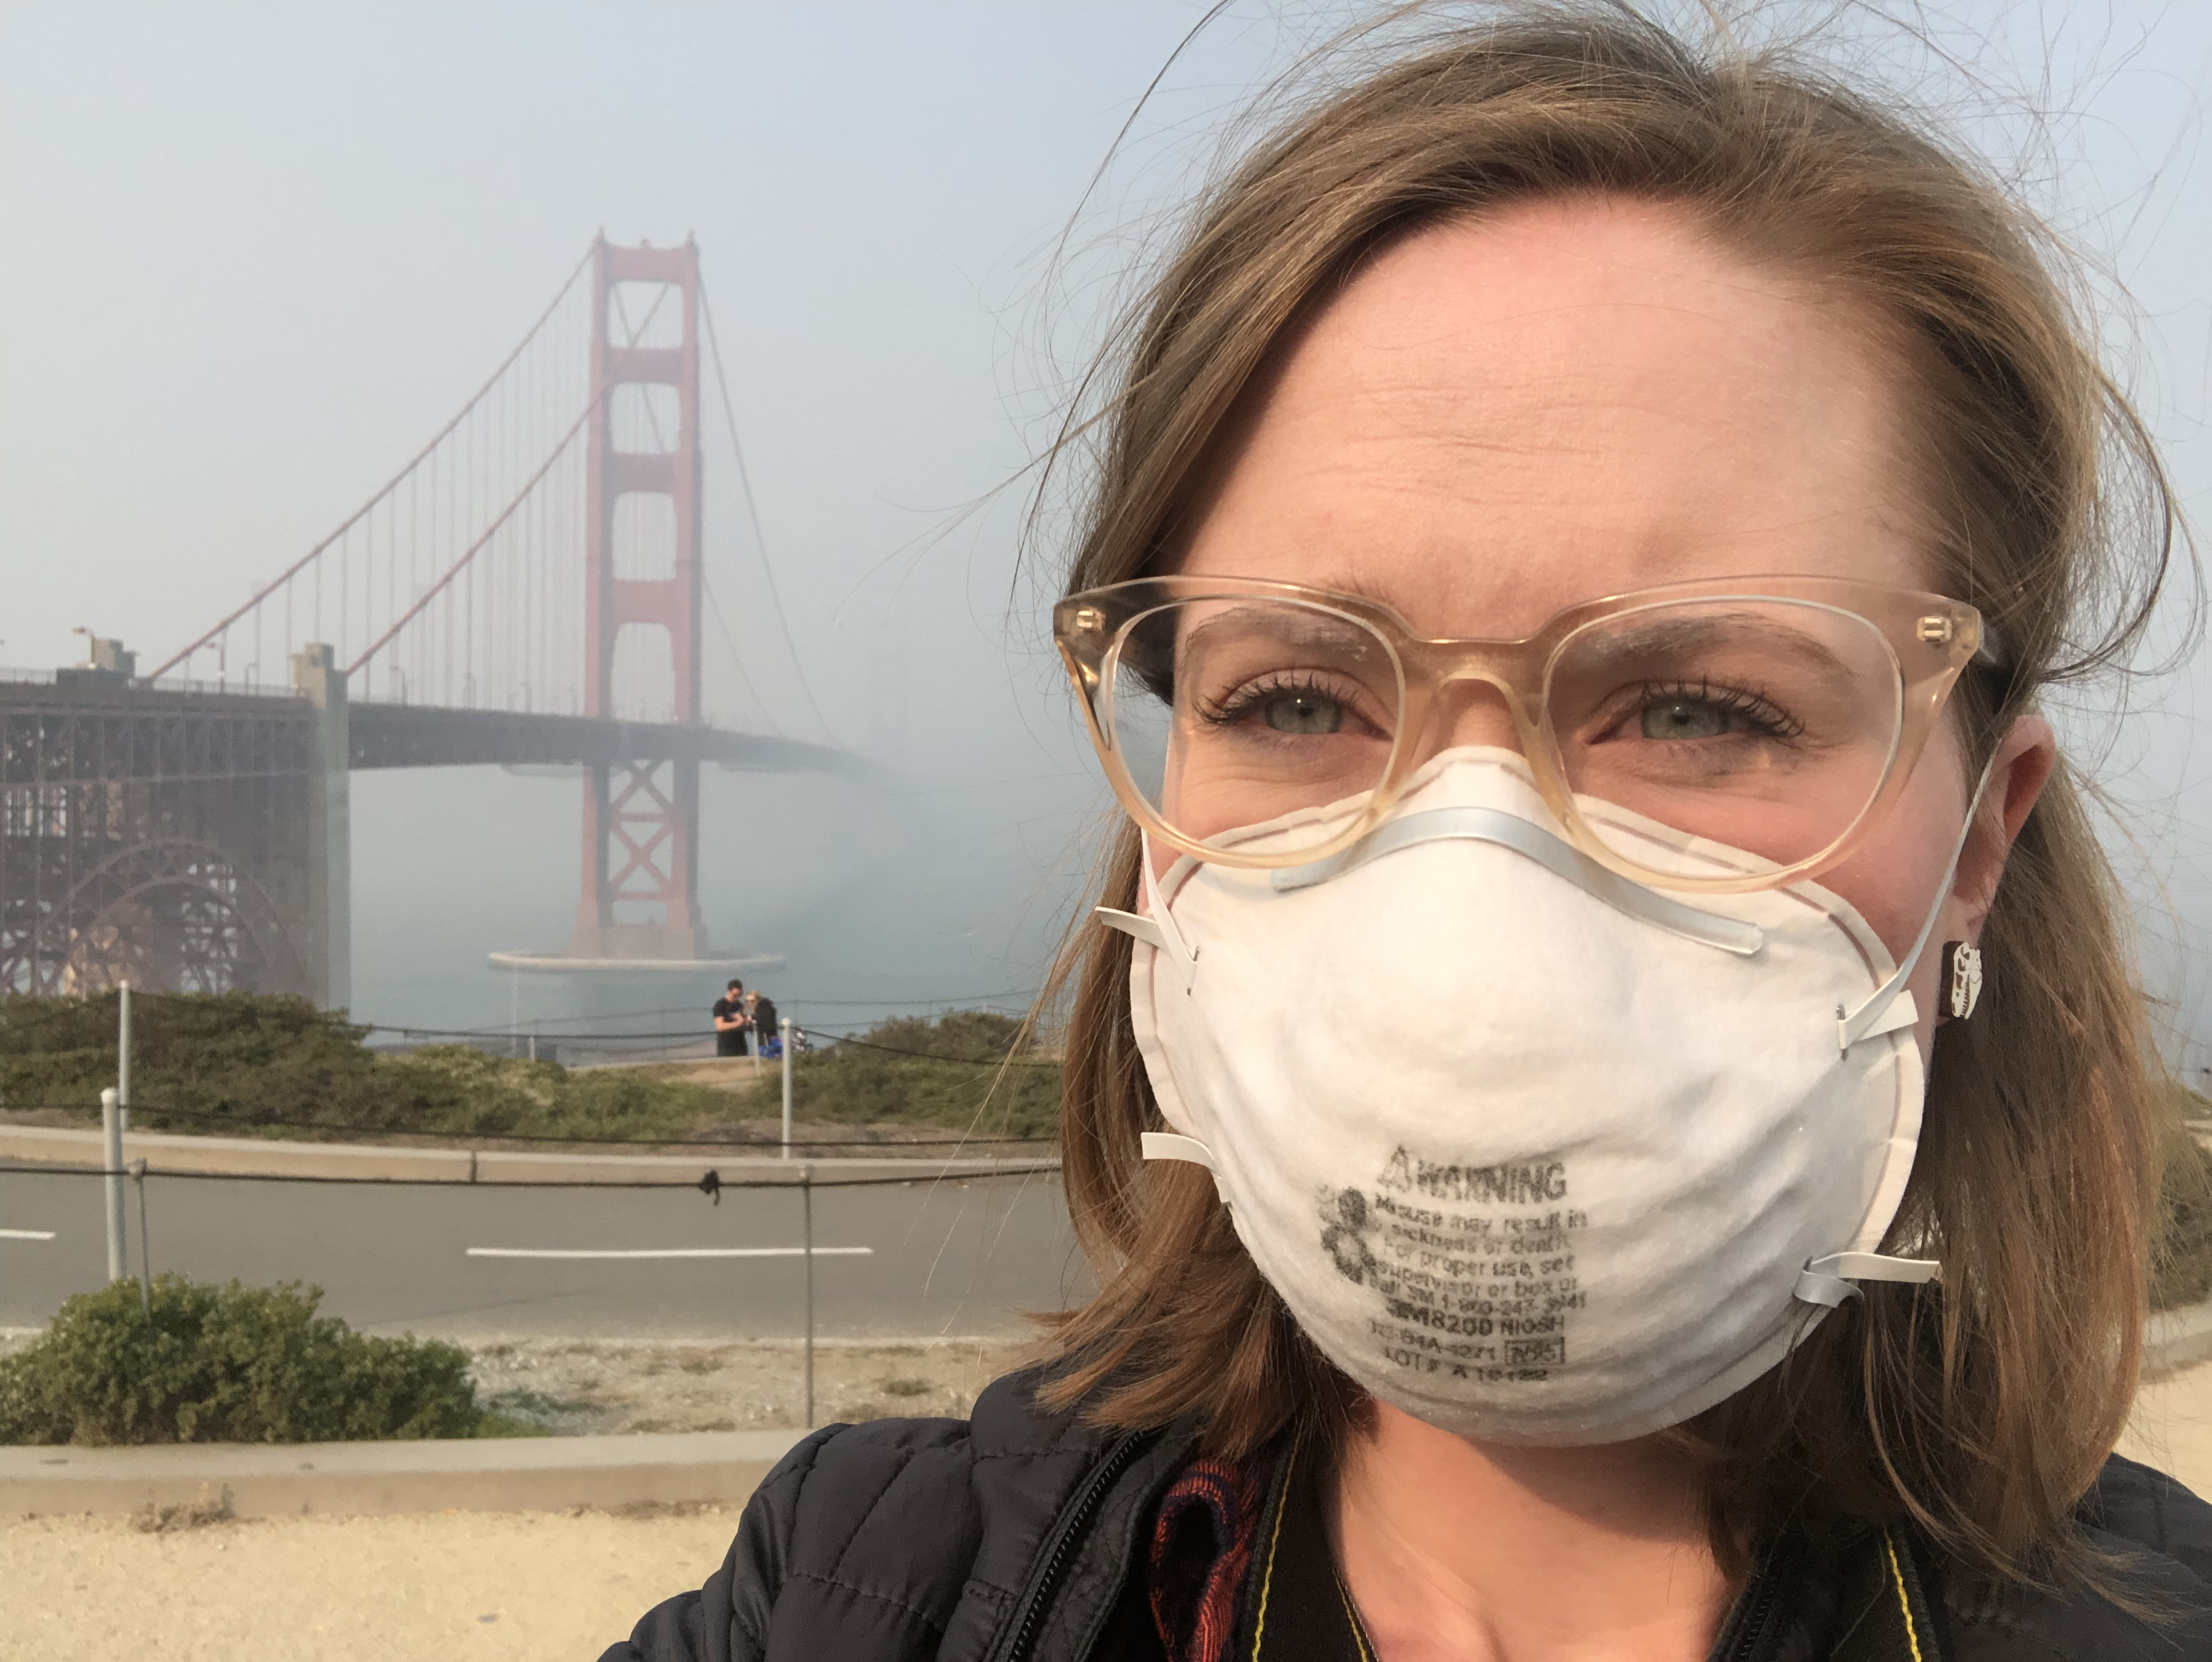 Photograph of woman with mask on in front of Golden Gate Bridge